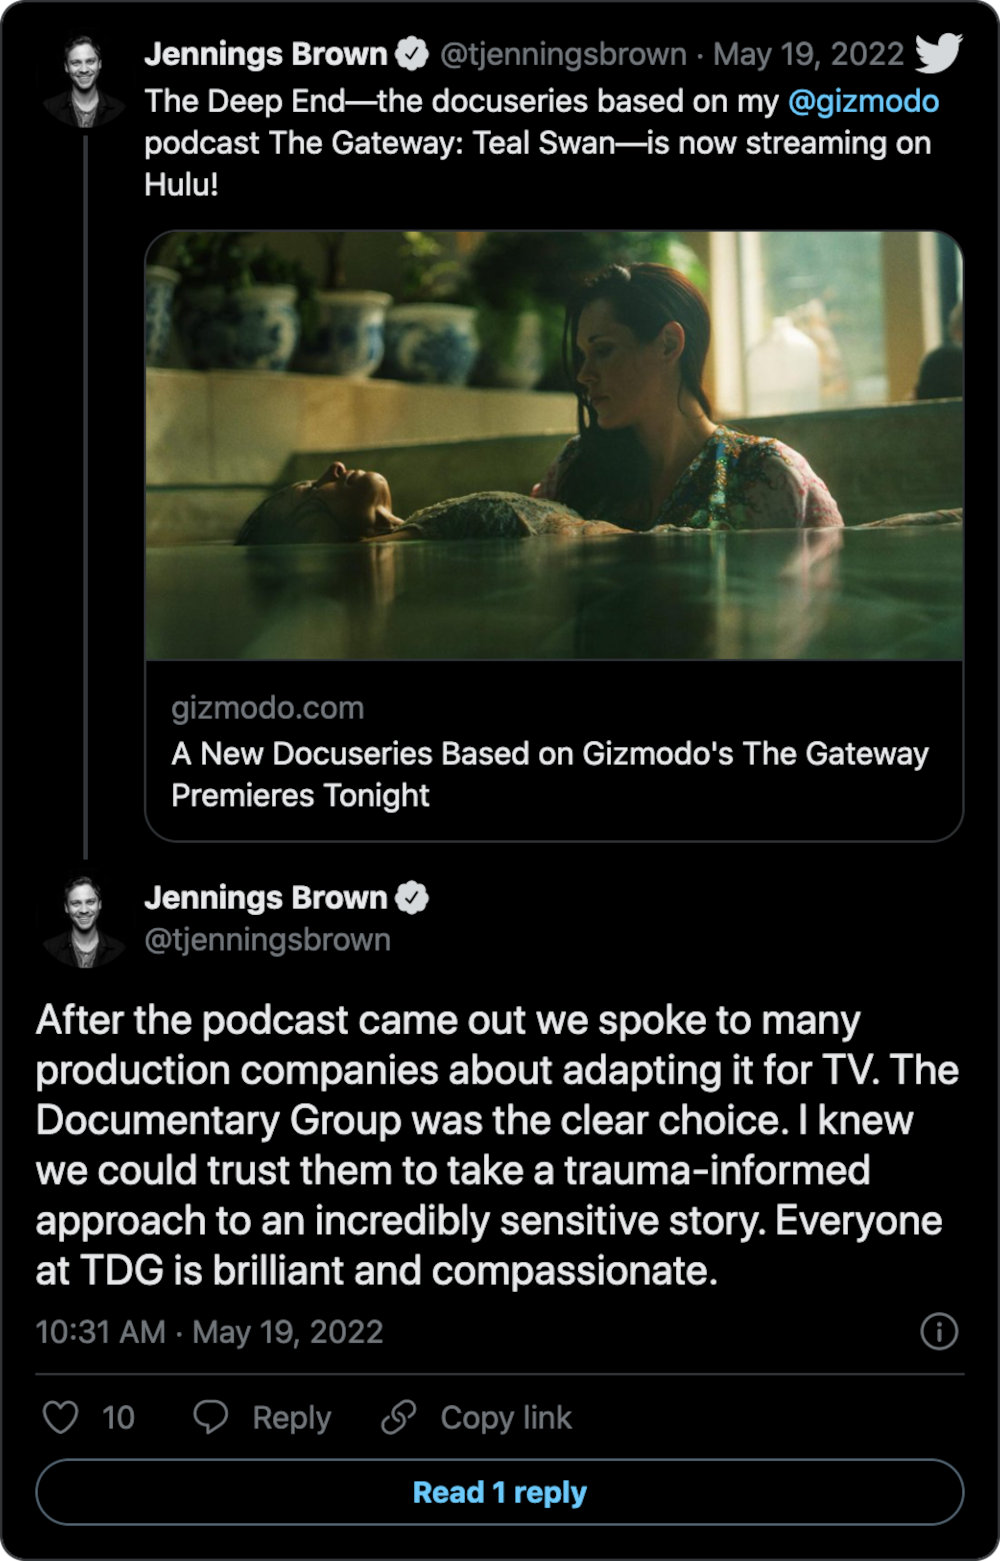 After the podcast came out we spoke to many production companies about adapting it for TV. The Documentary Group was the clear choice. I knew we could trust them to take a trauma-informed approach to an incredibly sensitive story. Everyone at TDG is brilliant and compassionate.